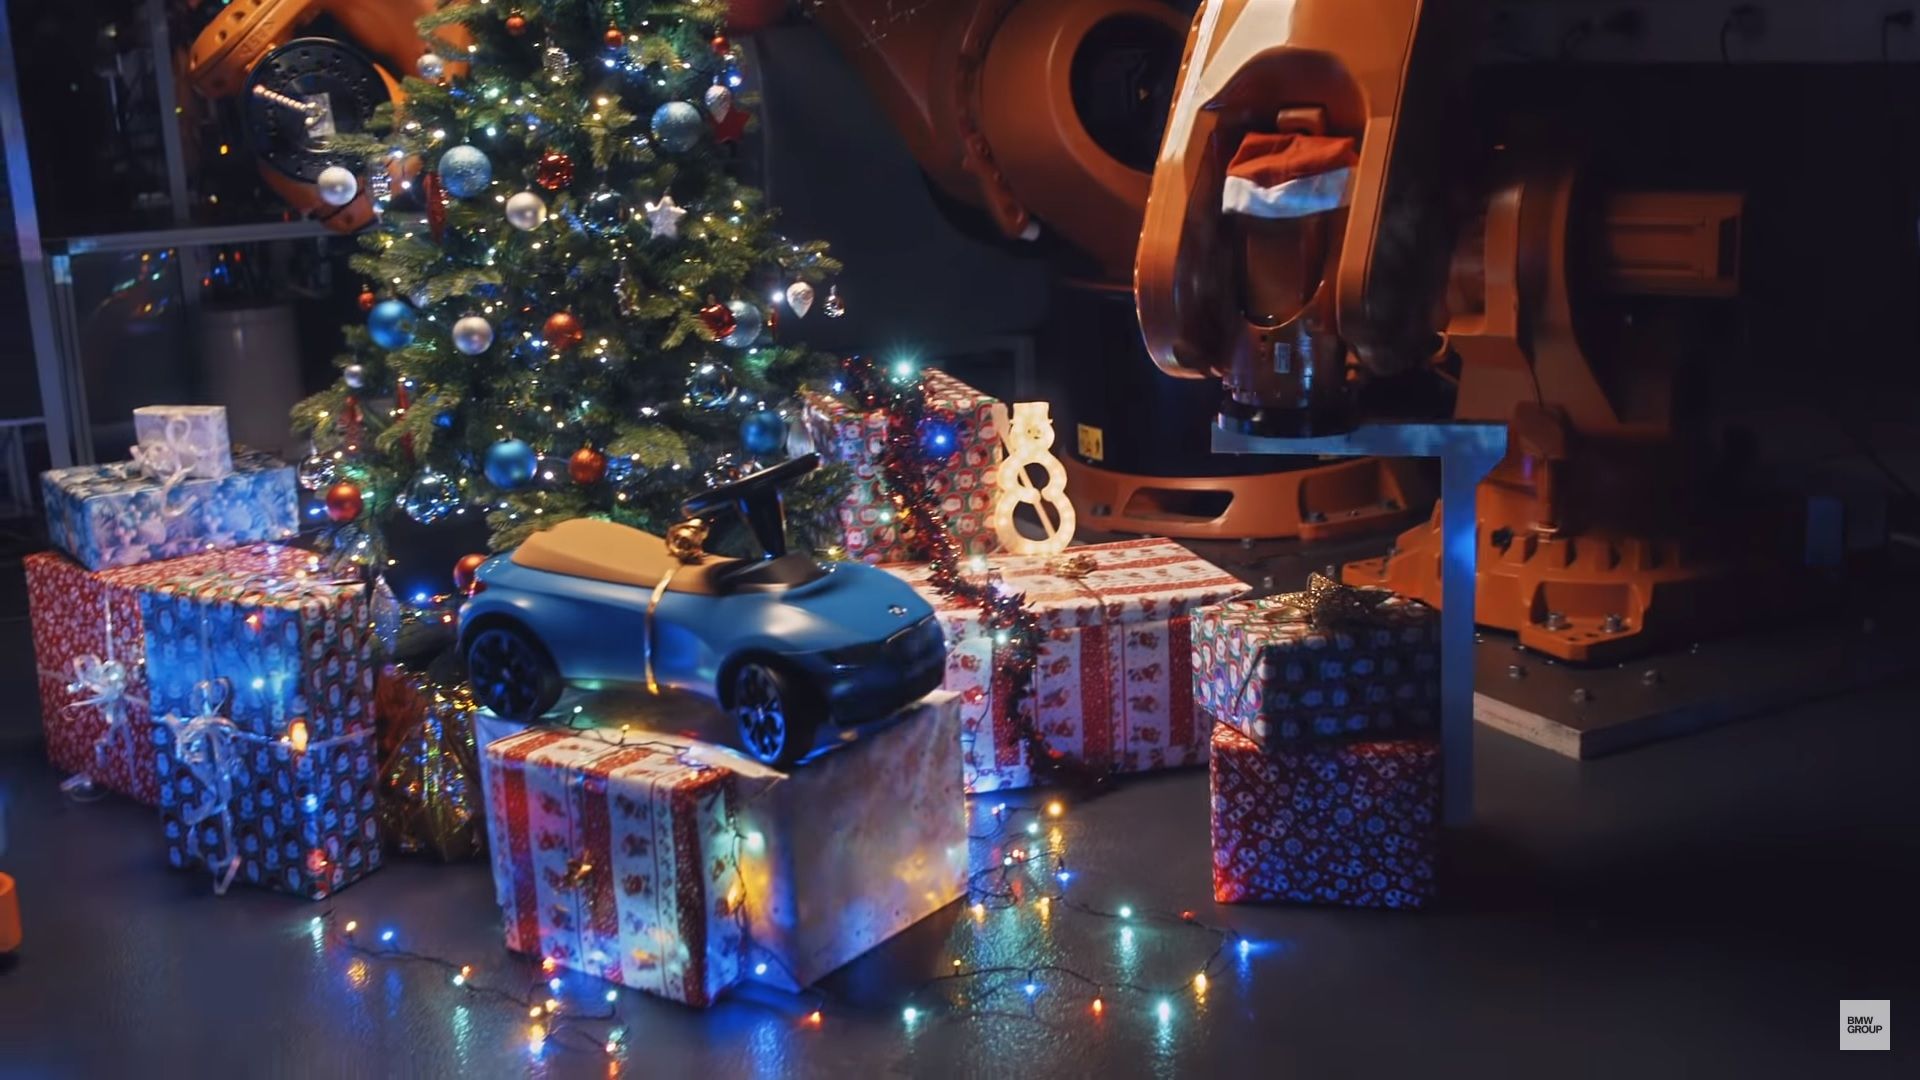 BMW's New Holiday Commercial Shows Off Technology with Christmas Spirit